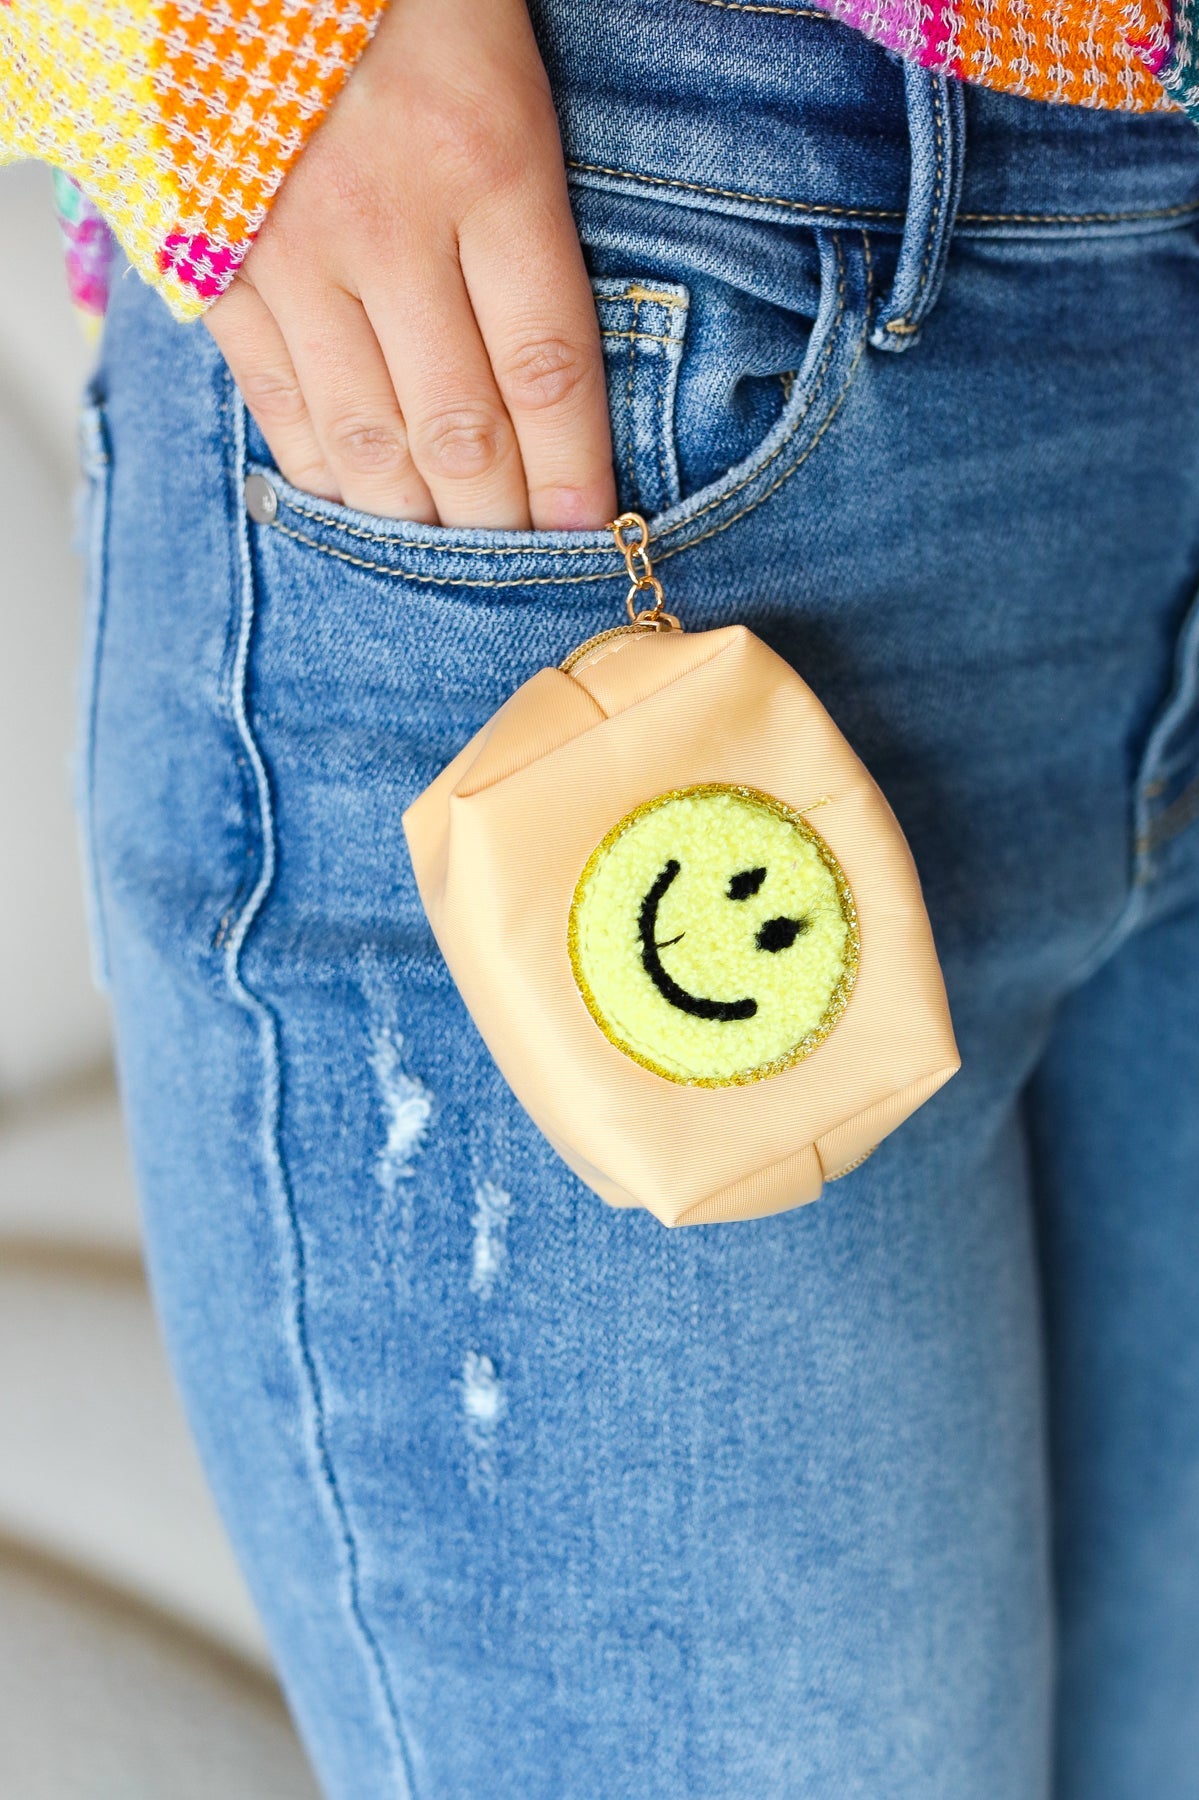 Manilla Smiley Face Patch Coin Purse Keychain ICON